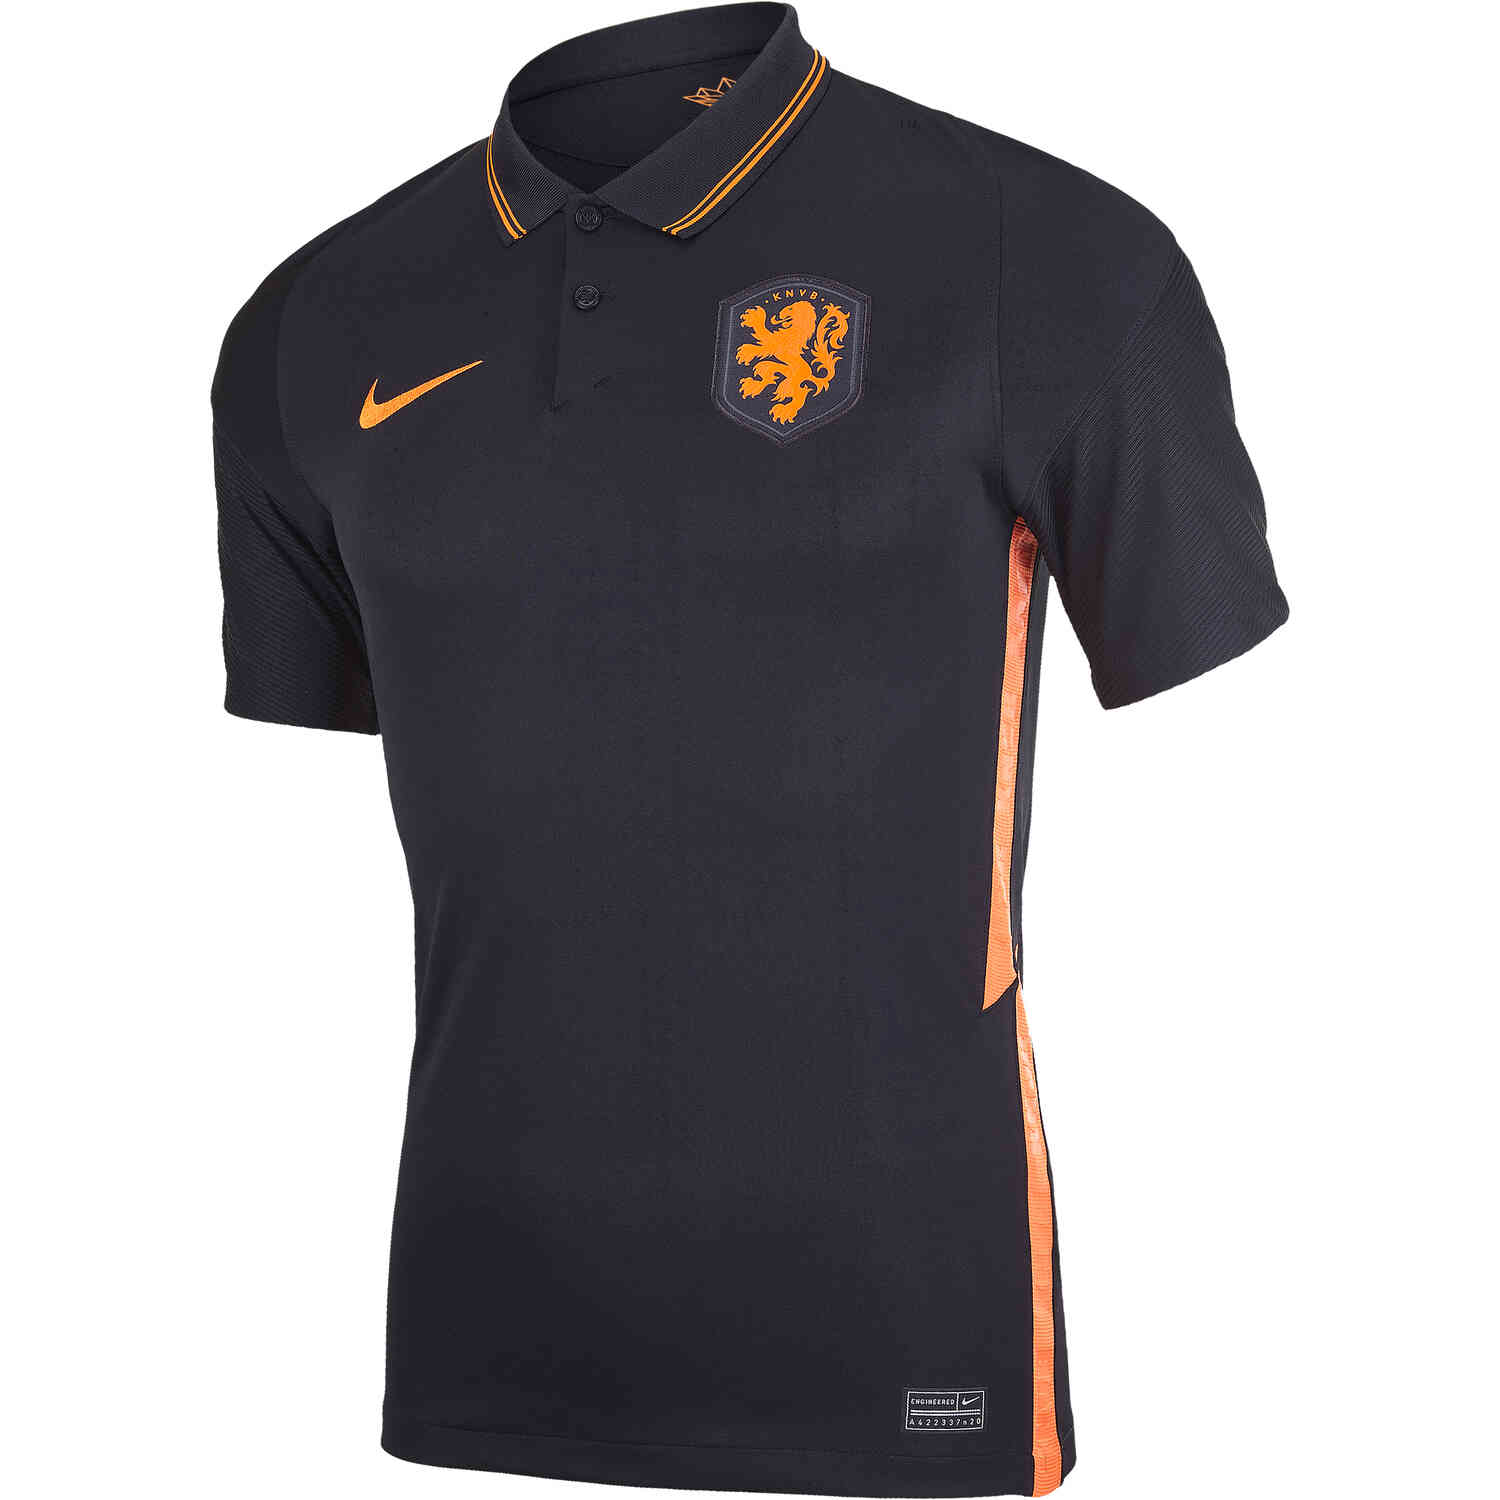 Netherlands Kit / Fifa World Cup 2014 Why Both Spain And Netherlands ...